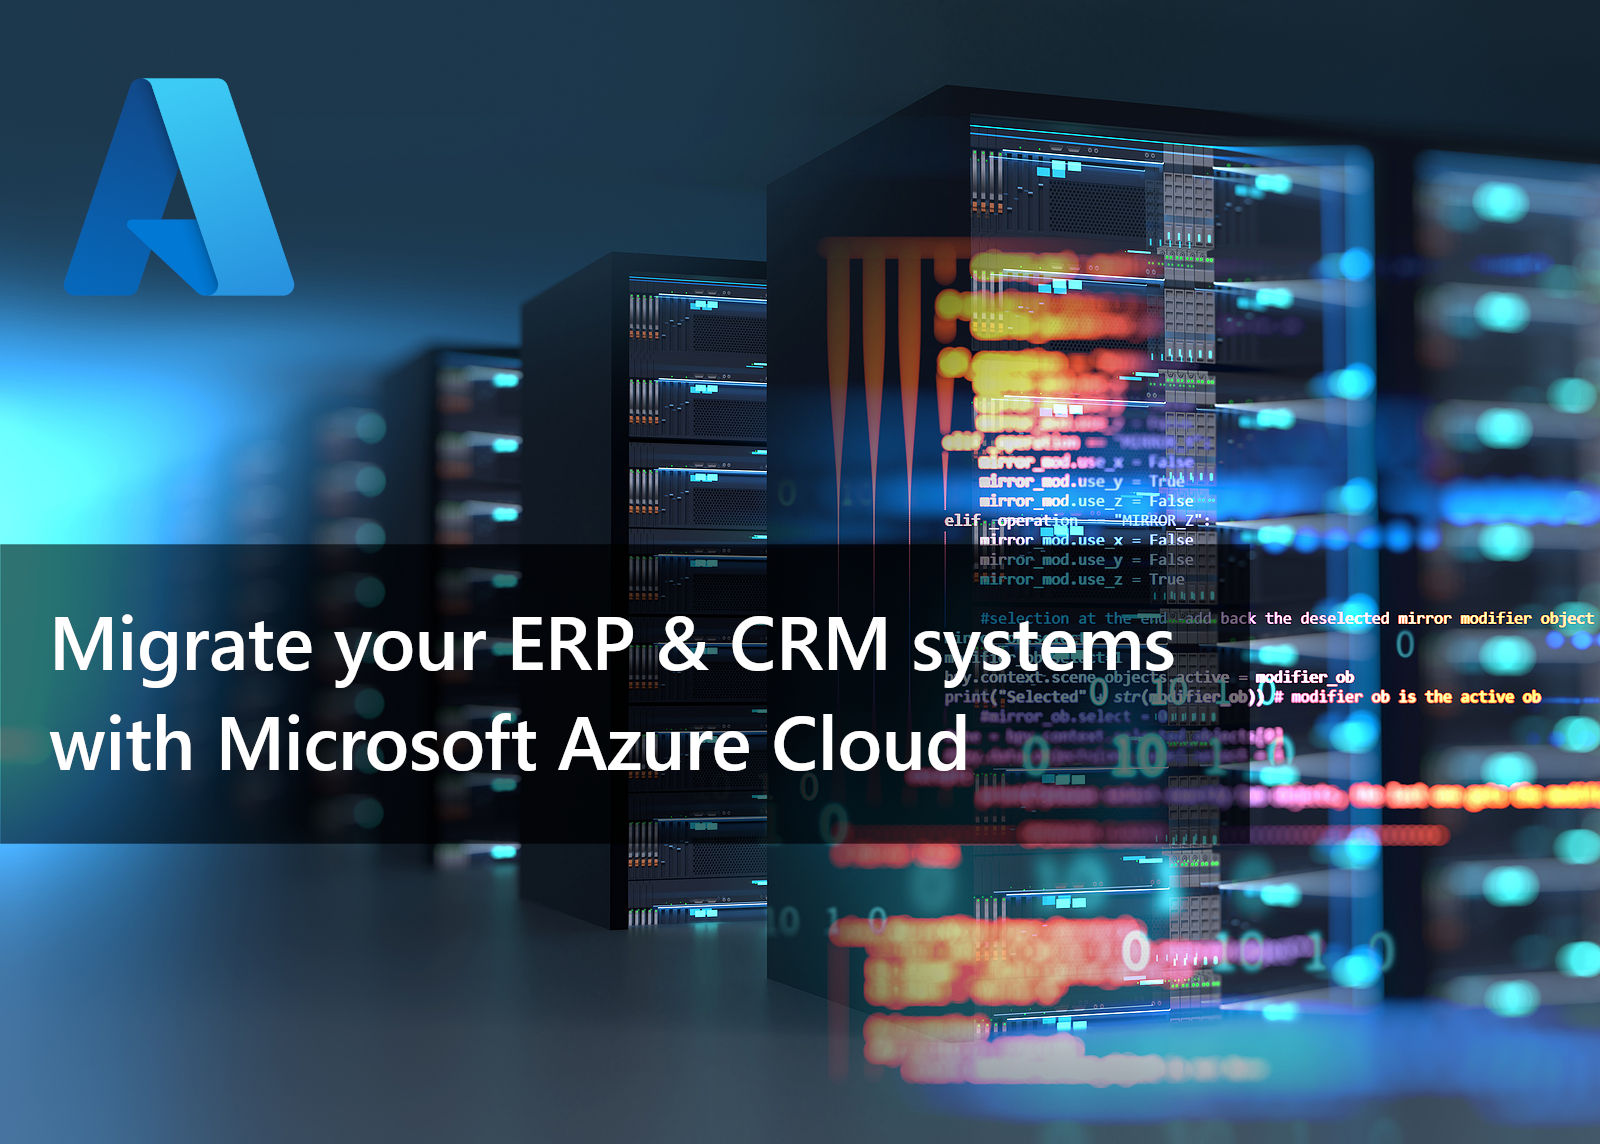 Migrate your ERP & CRM systems with Microsoft Azure Cloud